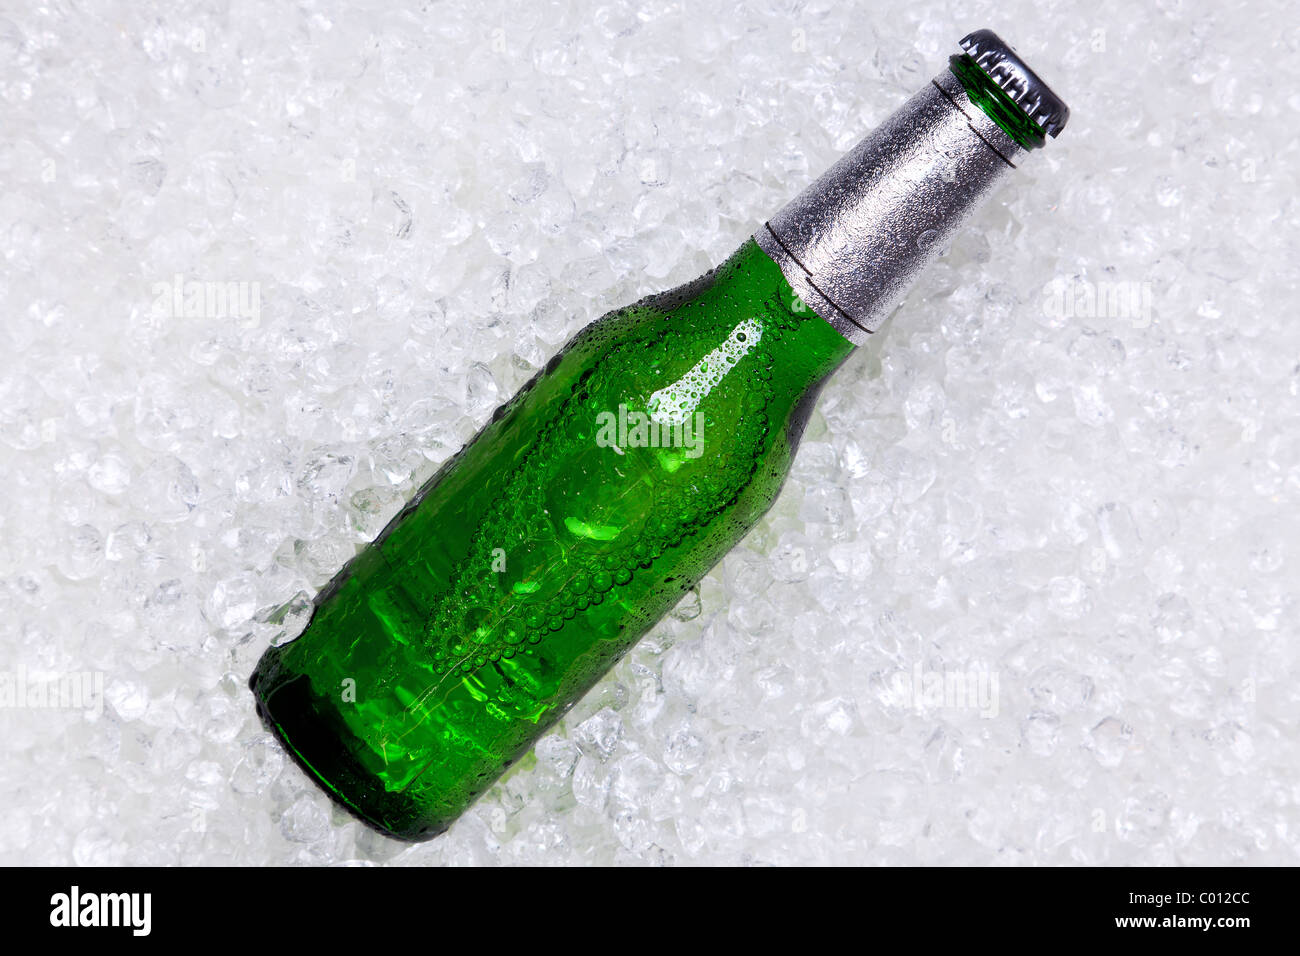 Photo of a green glass bottle of beer on crushed ice. Stock Photo